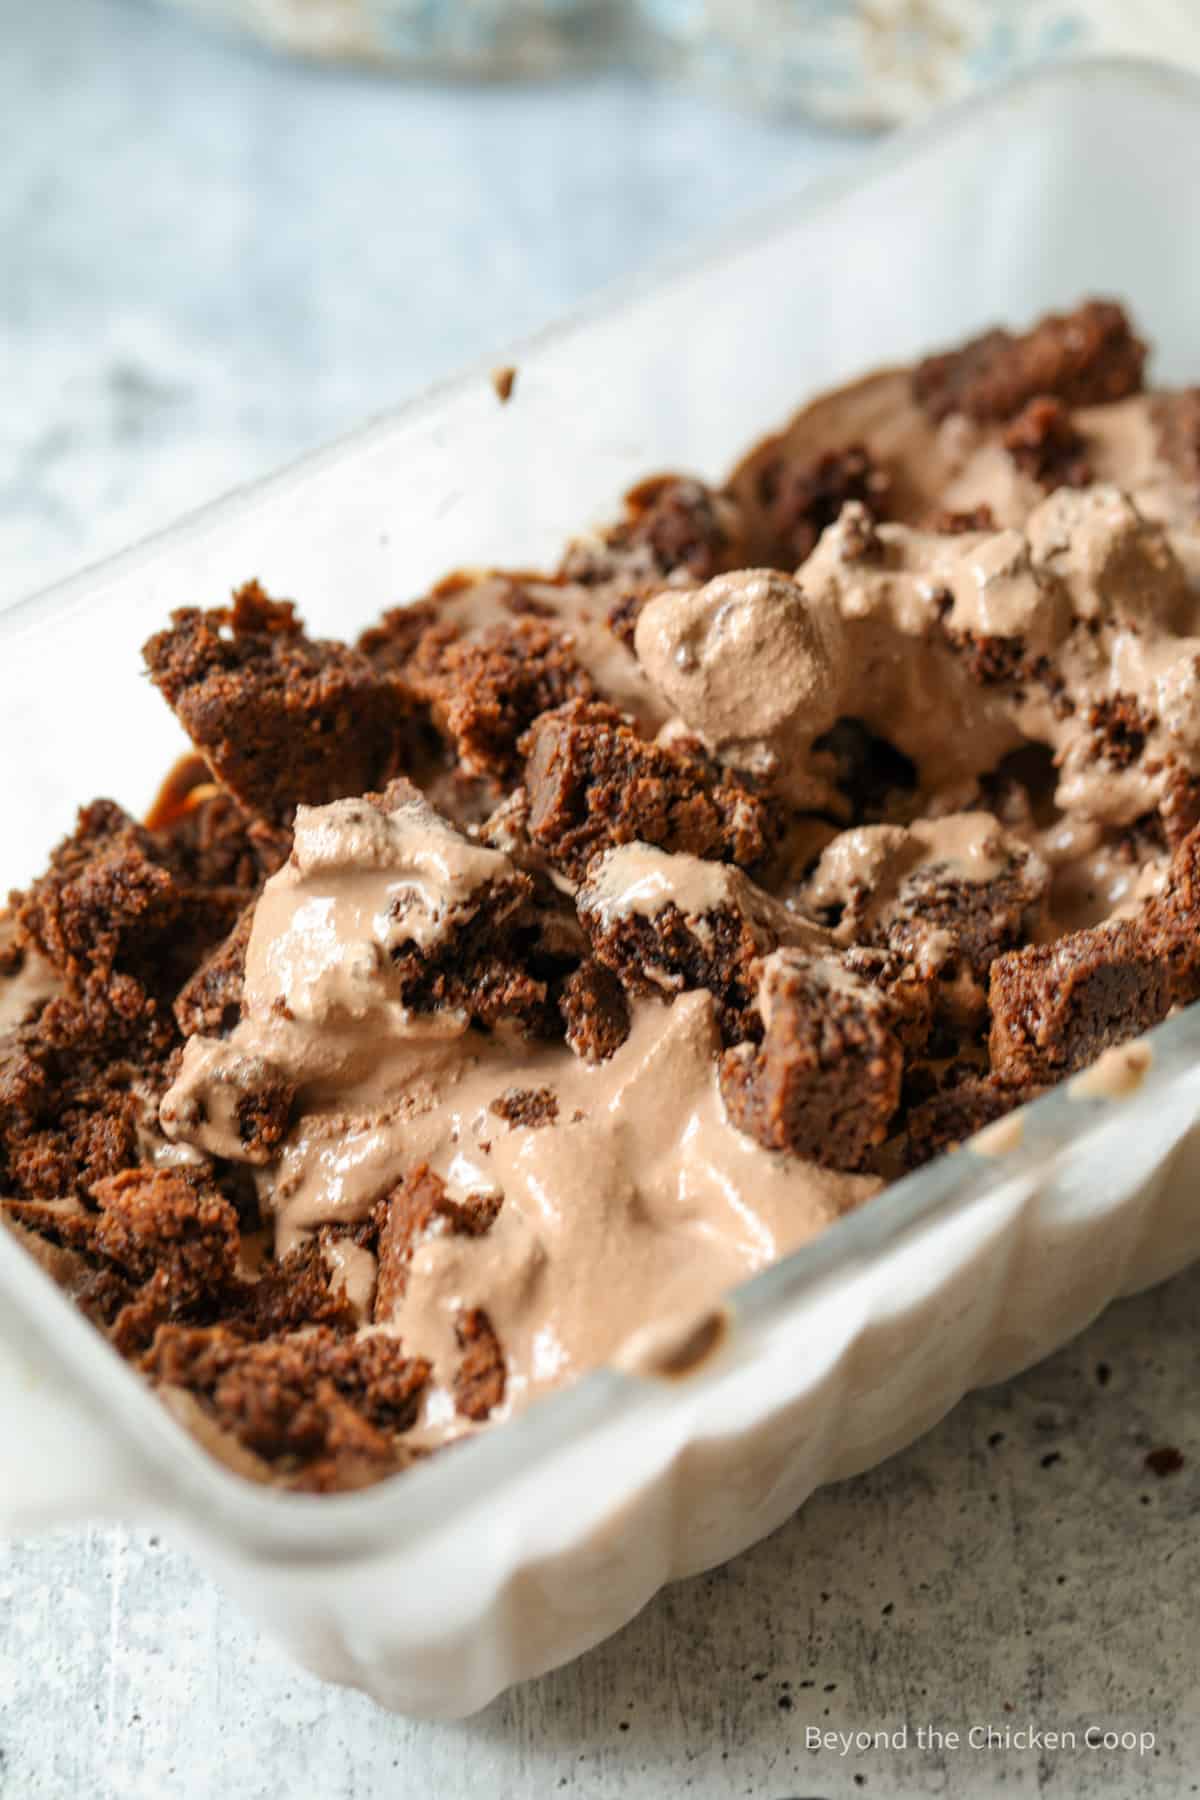 Brownie bits in ice cream.